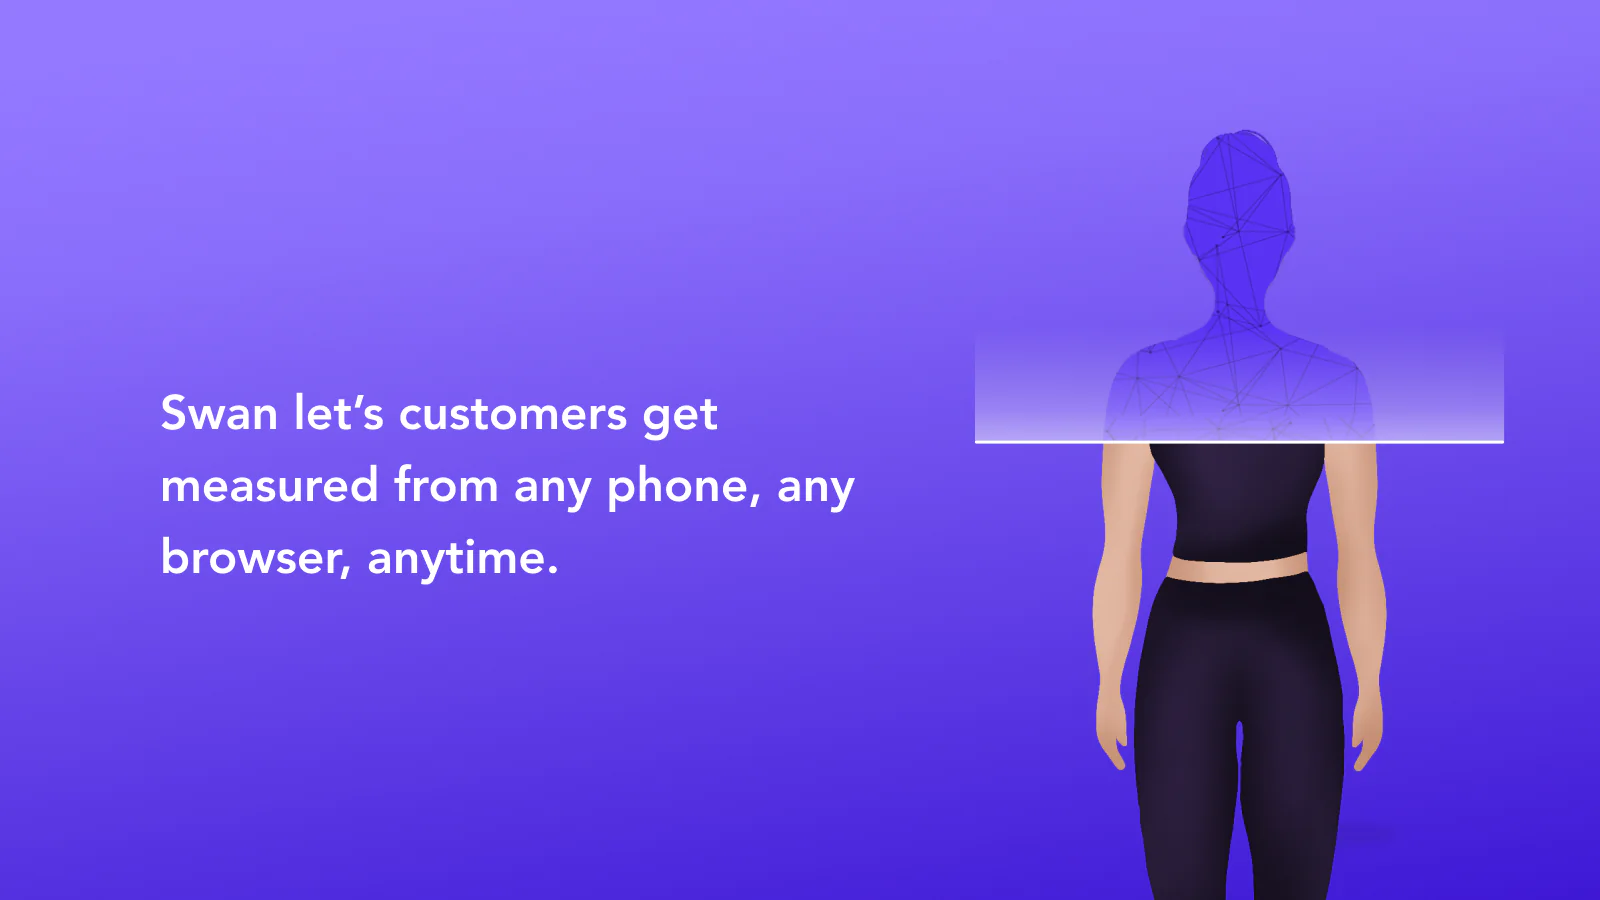 Swan let's customers get measured from any phone, any browser